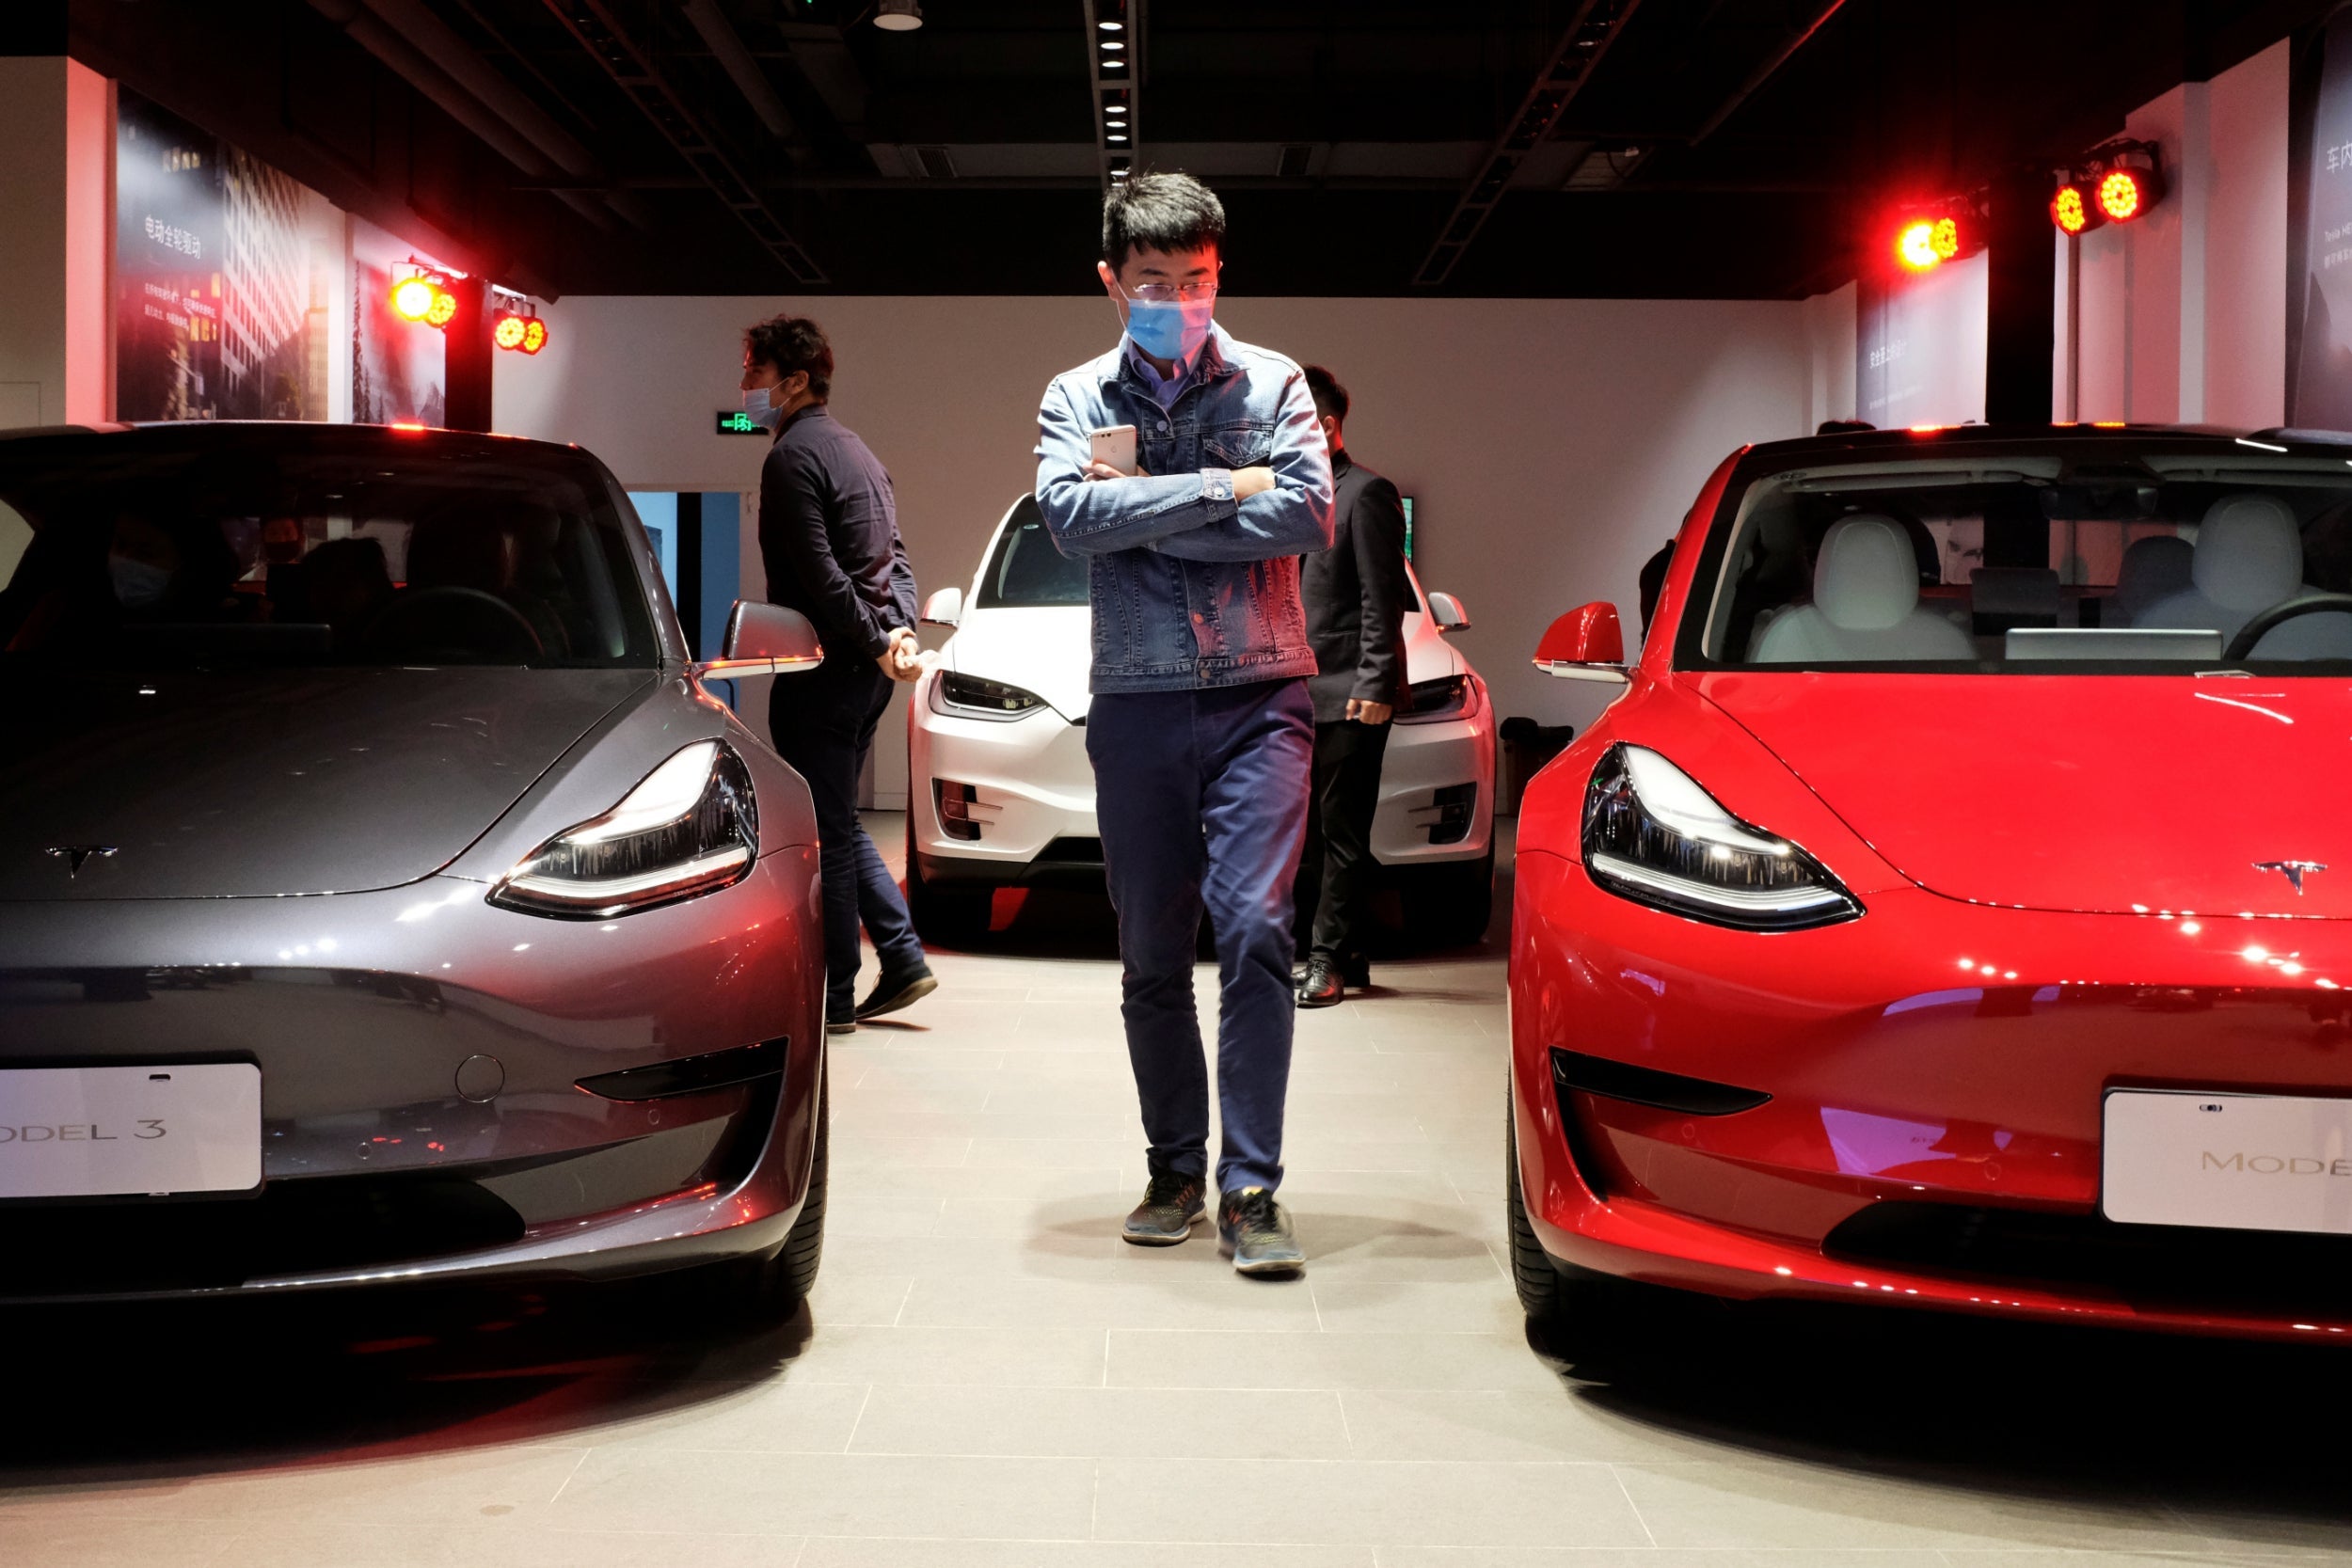 Shoppers in face masks following the coronavirus outbreak view Tesla Model 3 sedans and Tesla Model X sport utility vehicles at a new Tesla showroom in Shanghai, China in May